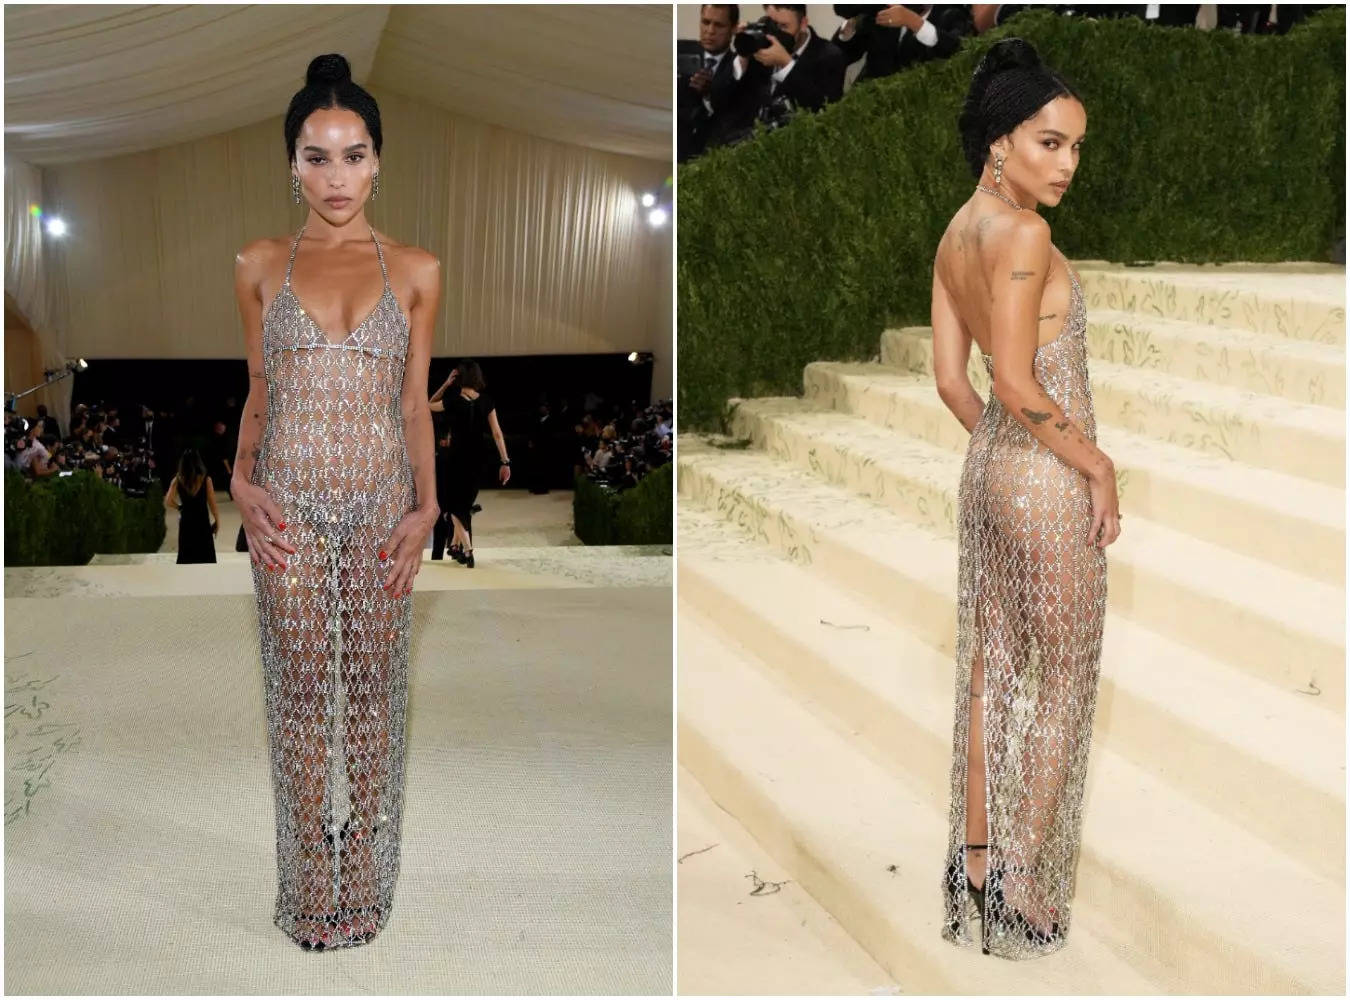 
Zoë Kravitz says criticism for showing too much skin at the 2021 Met Gala led her to delete all her Instagram photos
